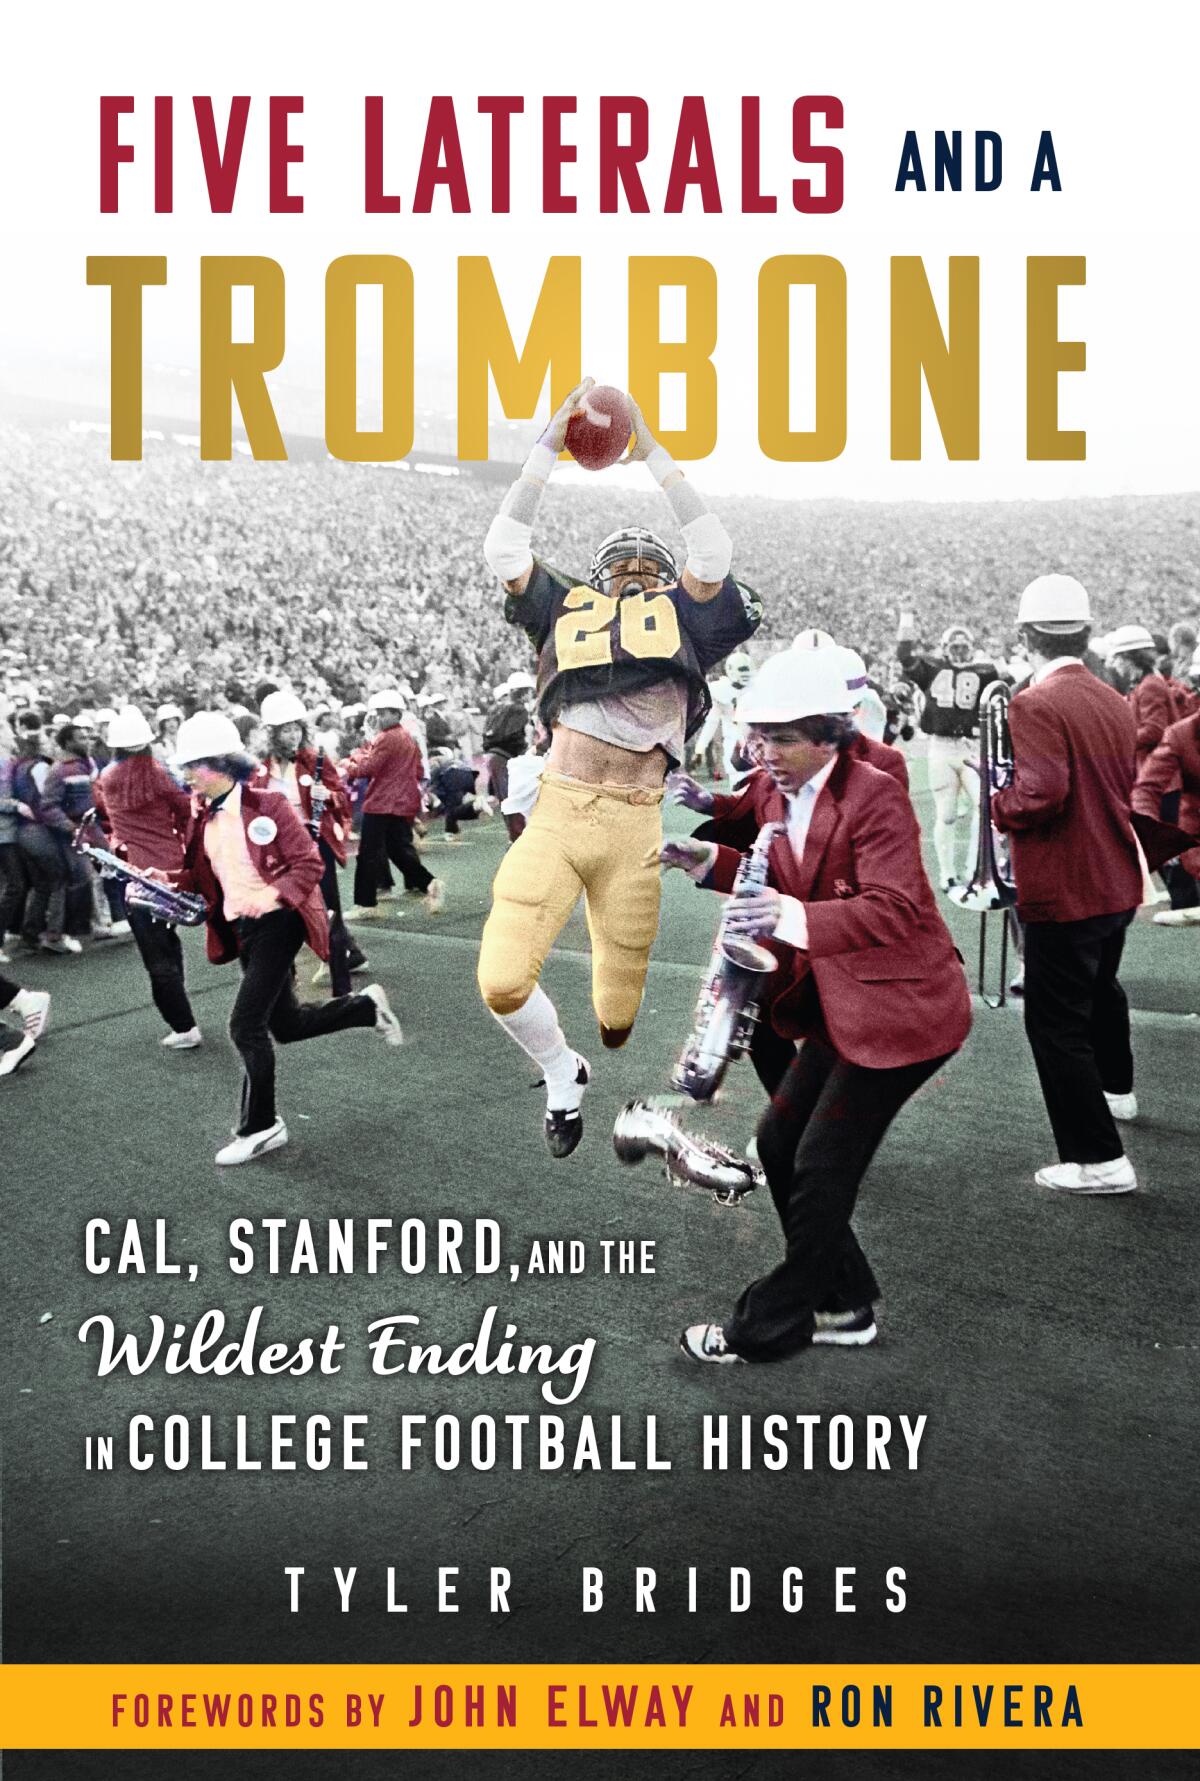 New book on Stanford-Cal lateral game.